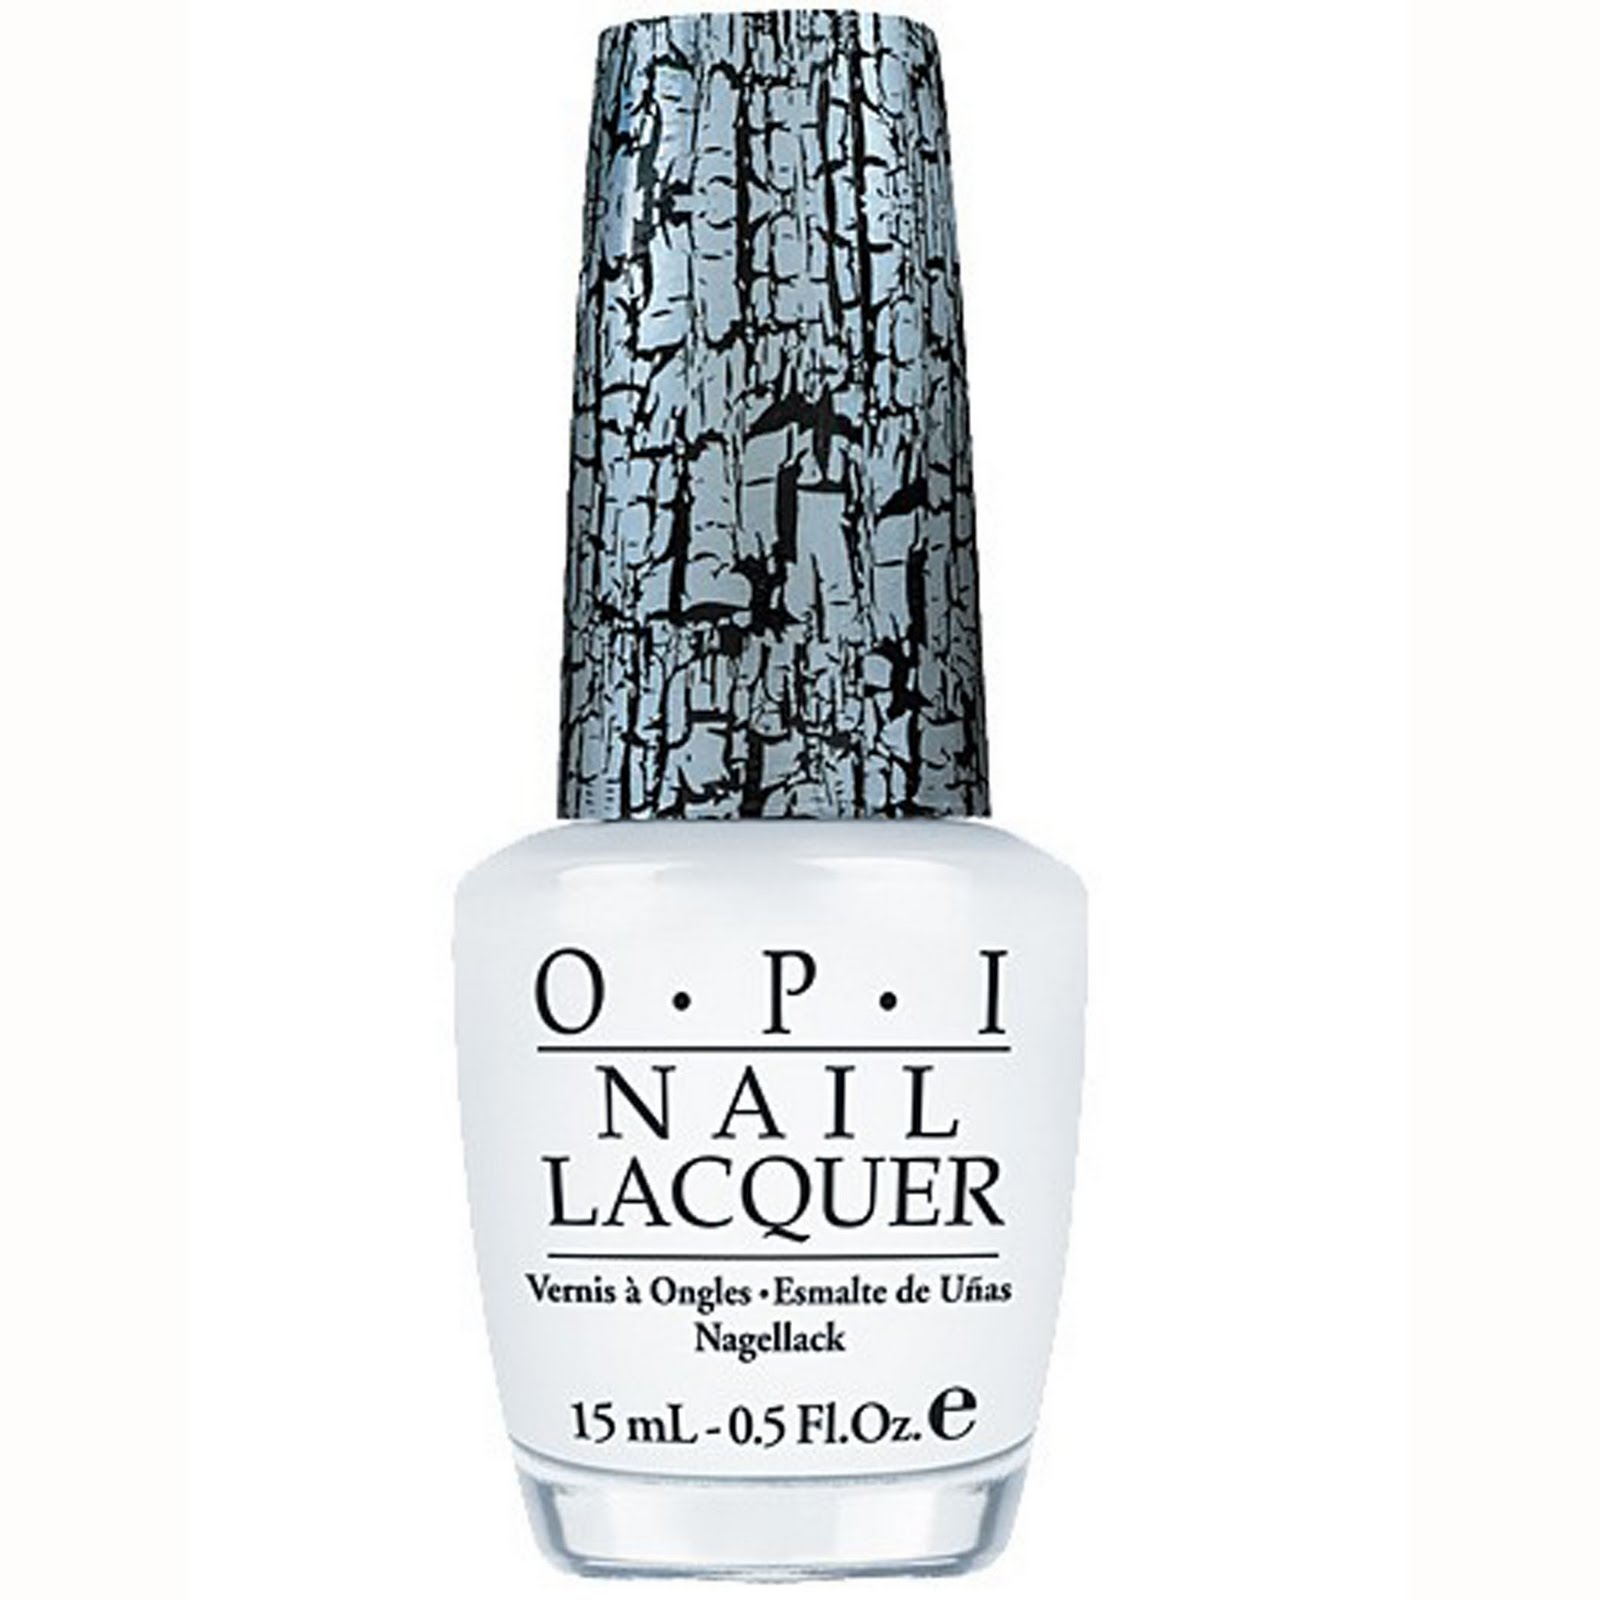 Shatter by opi & glam slam collection 2011 - fabelish.